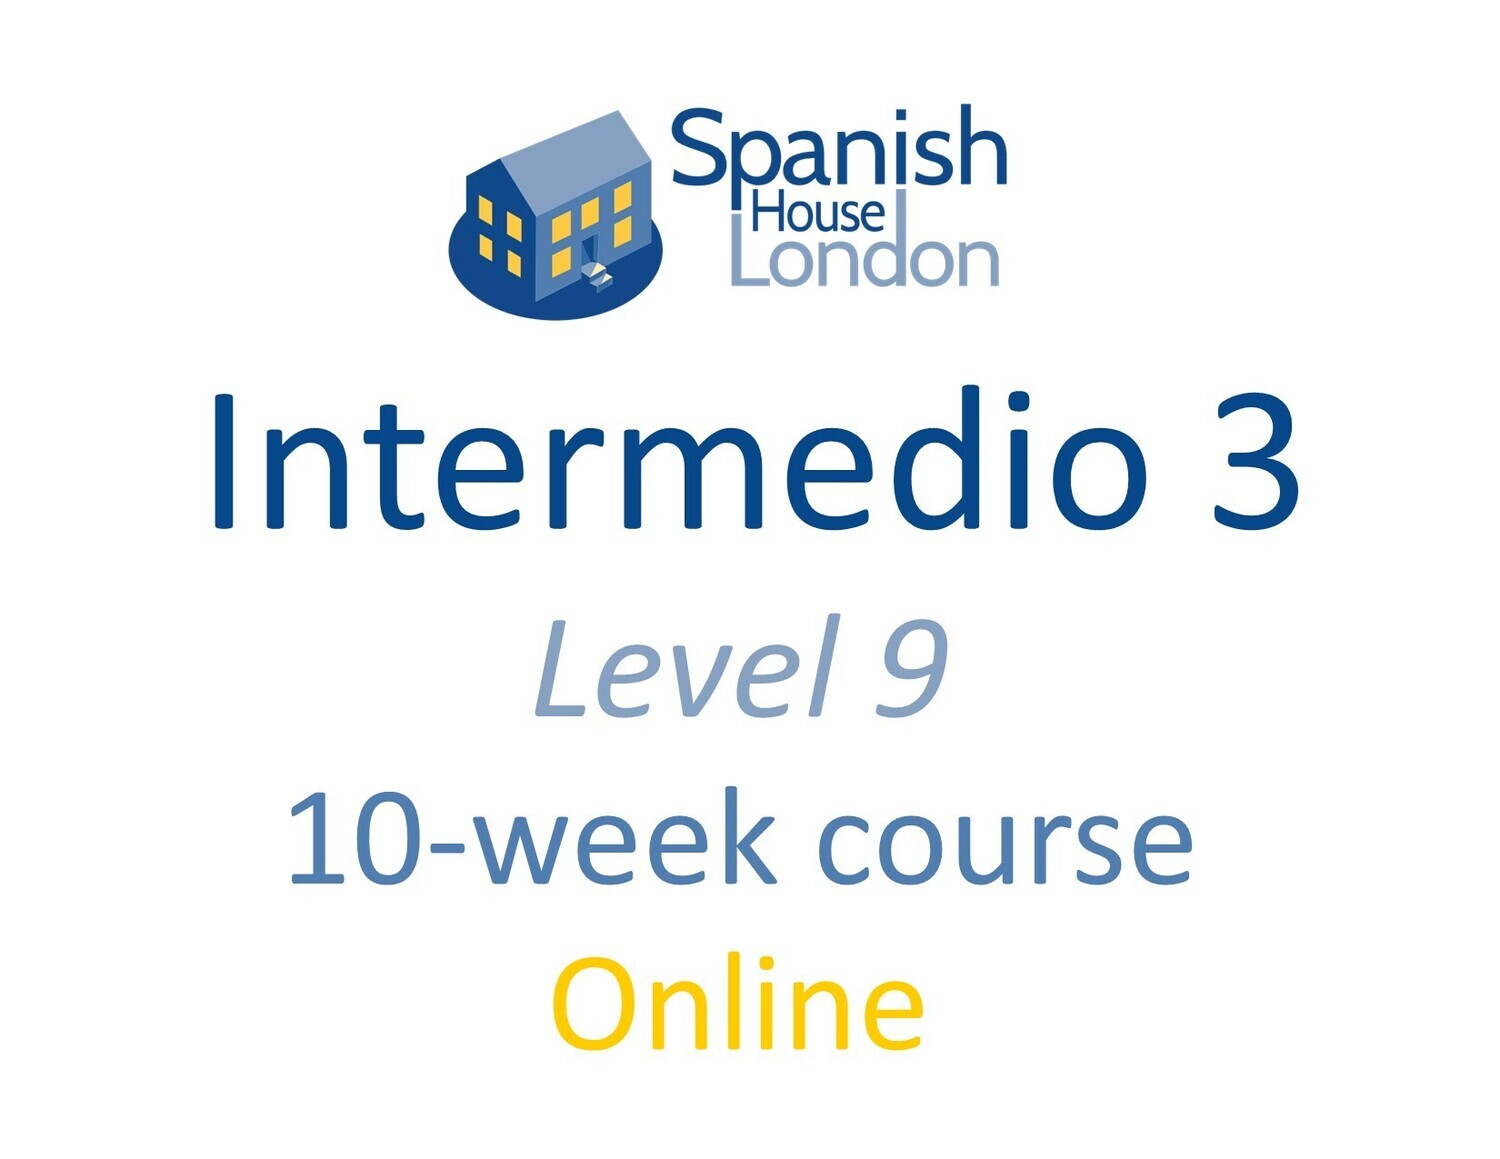 Intermedio 3 Course starting on 16th August at 7.30pm